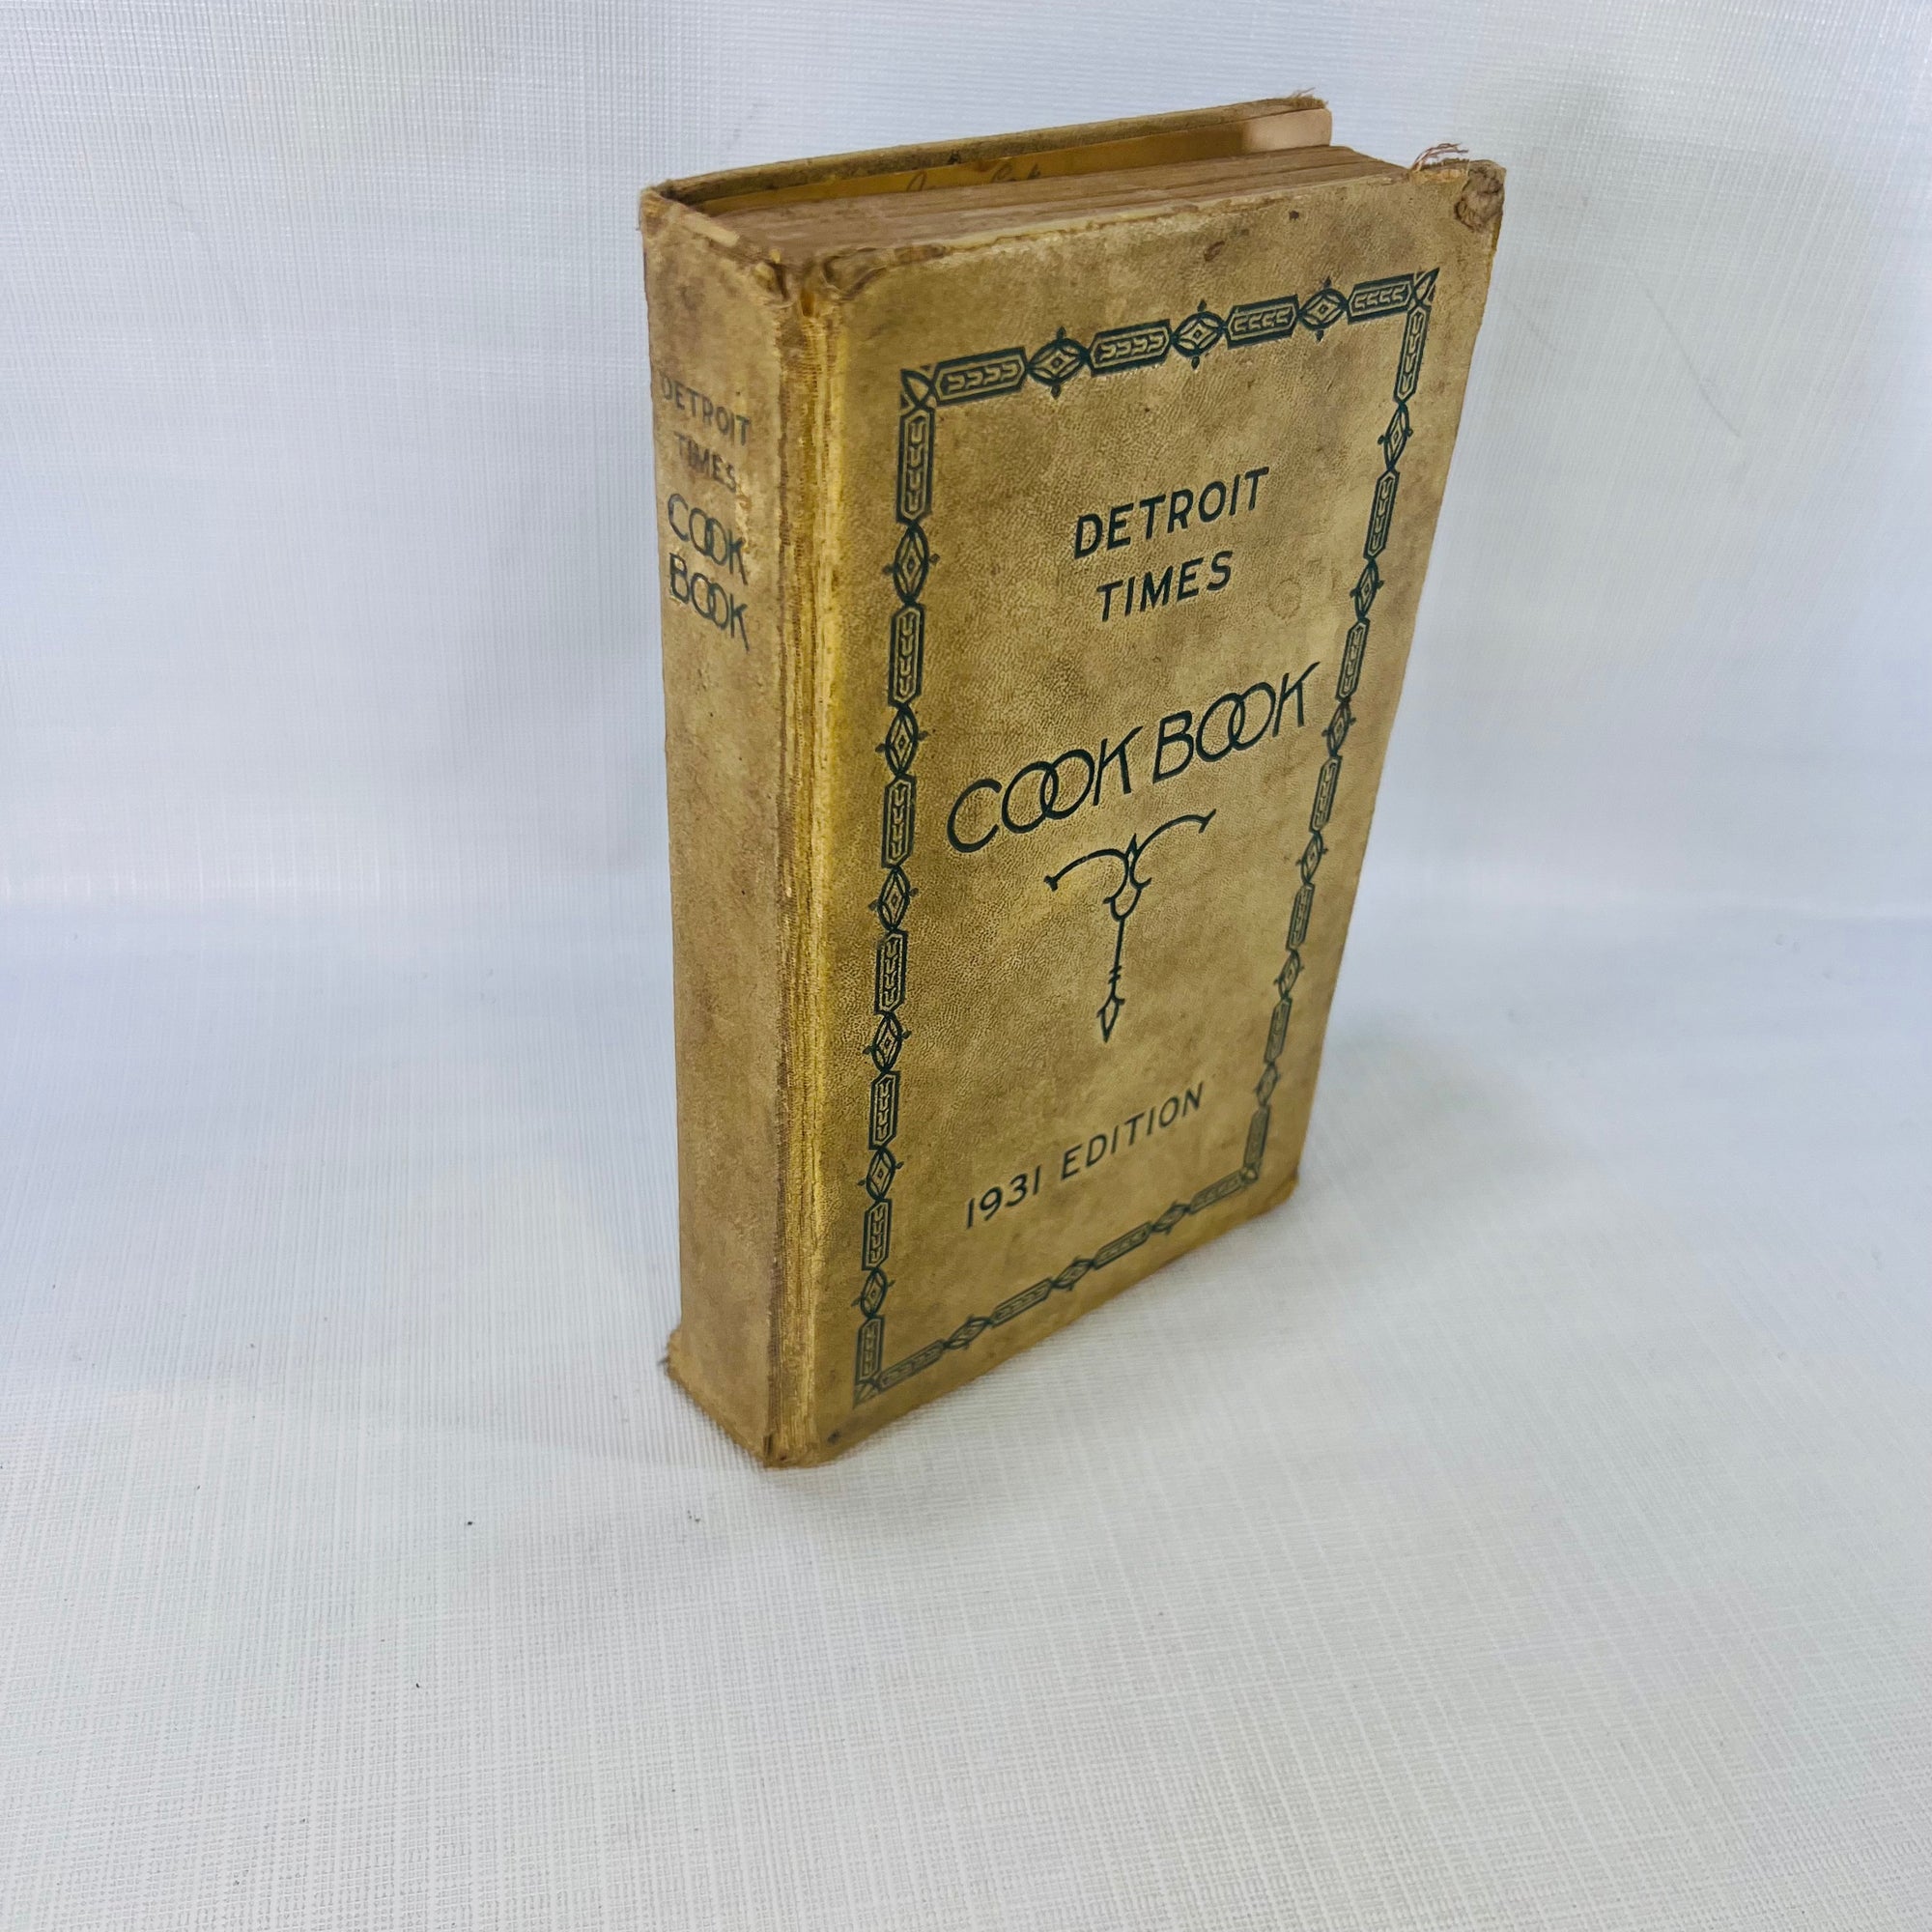 Detroit Times Cookbook 1931 Edition Published by The Detroit Times John F. Cuneu Company Vintage Recipes Cookbook